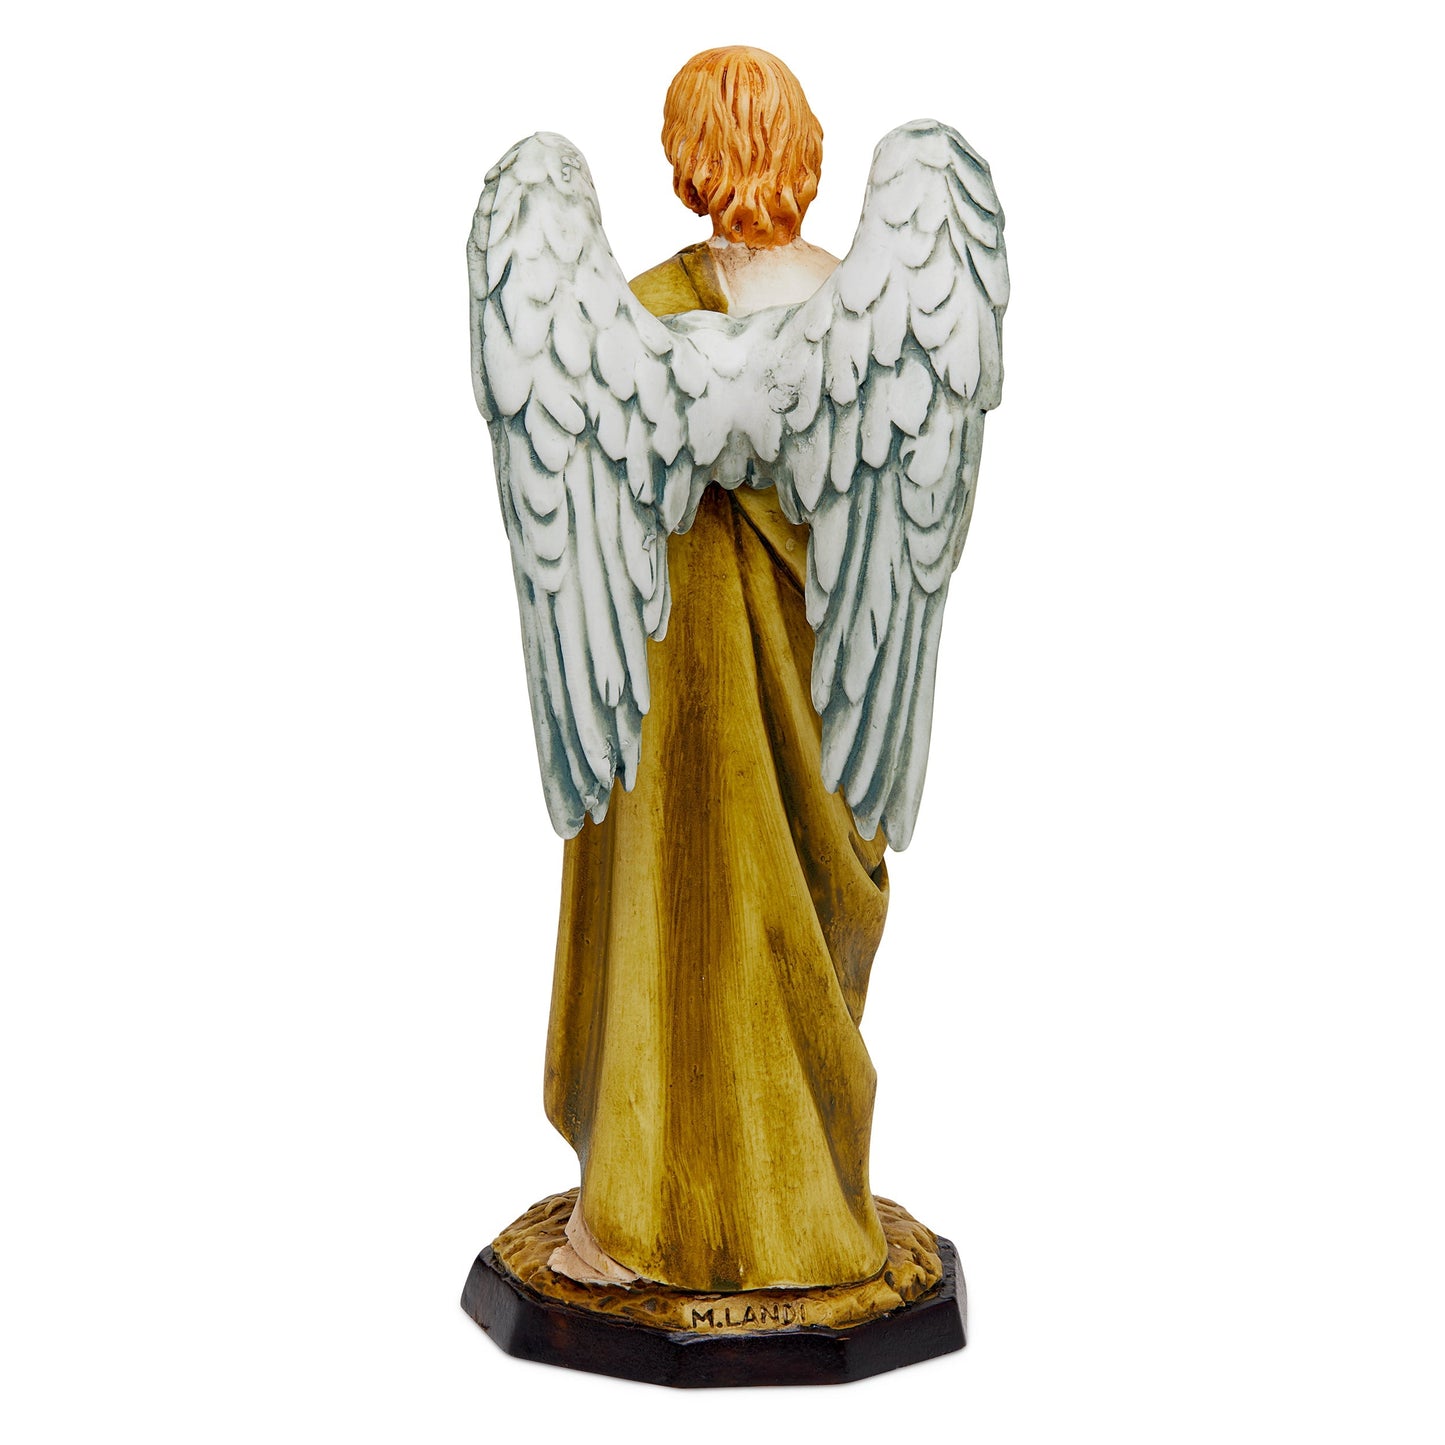 Mondo Cattolico 17 cm (6.69 in) Resin Statue of Guardian Angel With a Little Girl